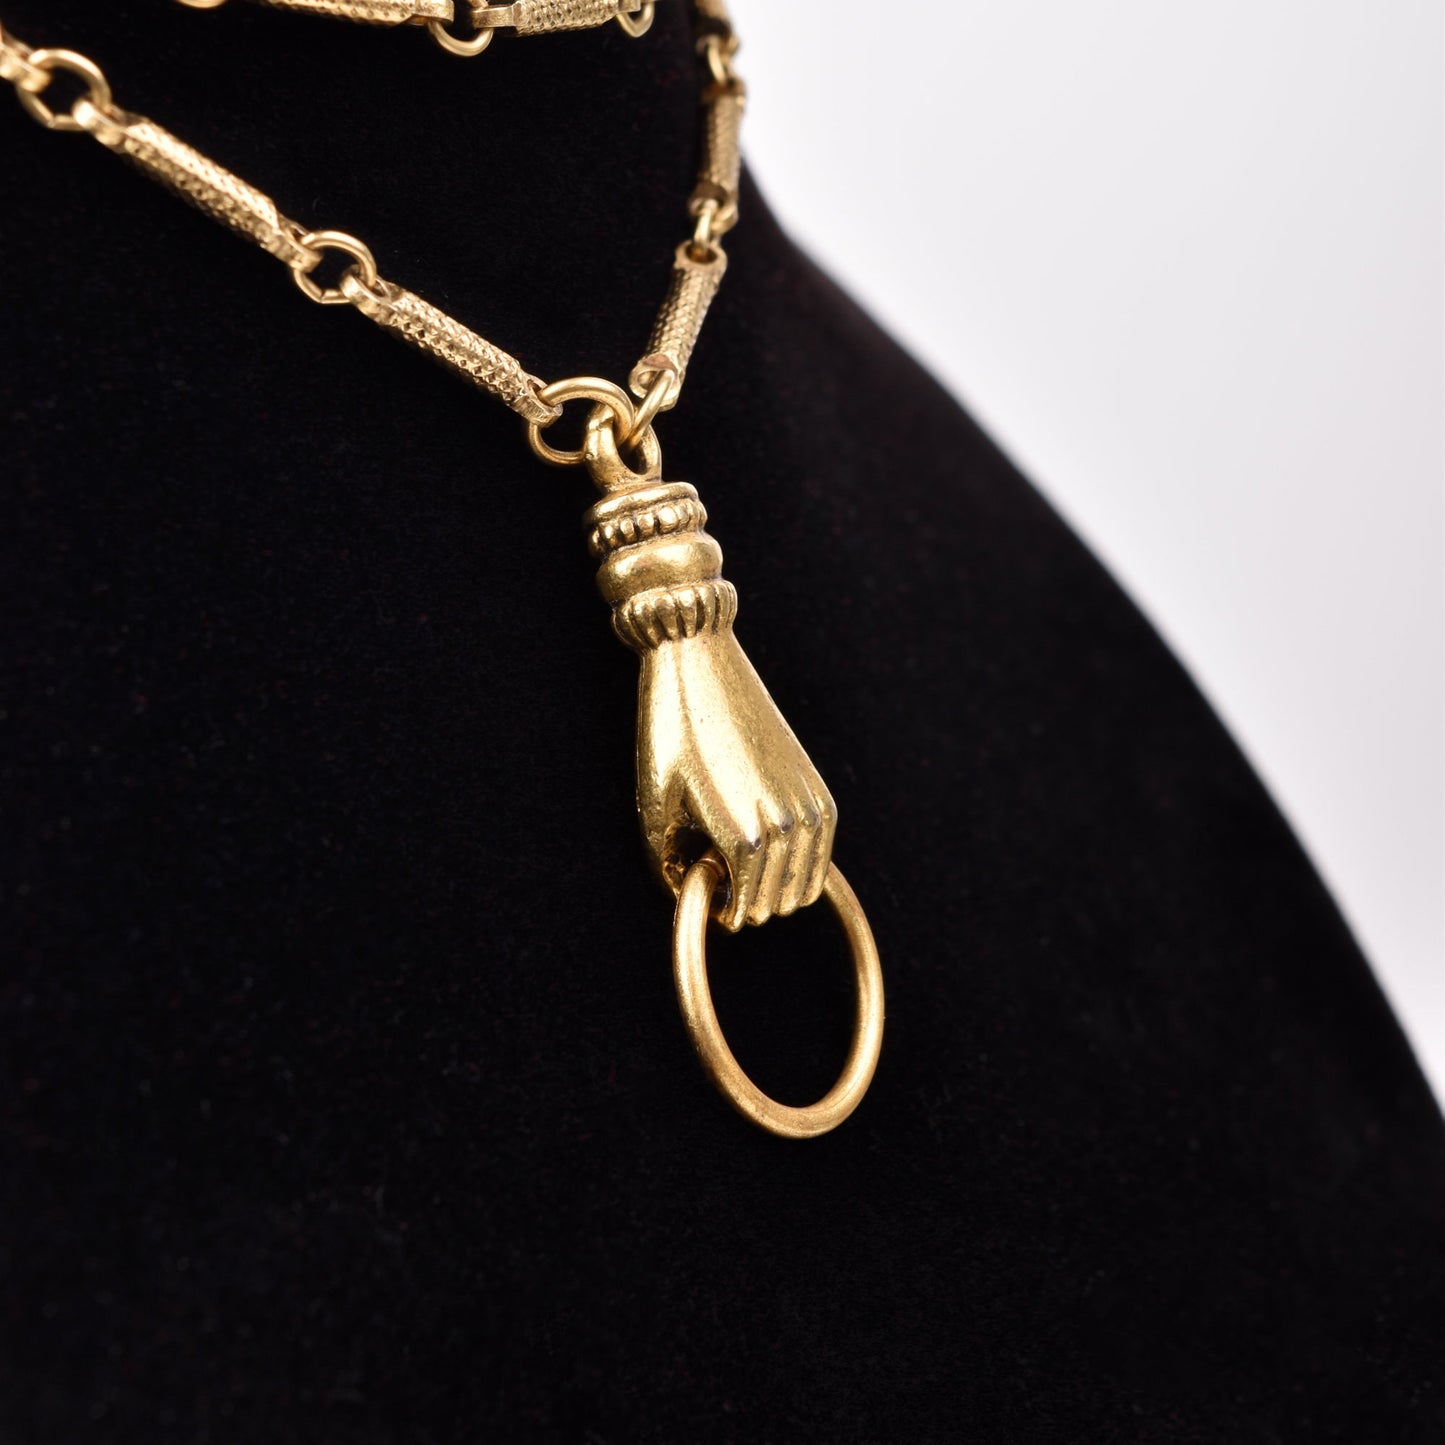 10K Gold Filled Hand-Knocker Pendant Necklace, Pocket Watch Chain & Fob, Estate Jewelry, 30" L